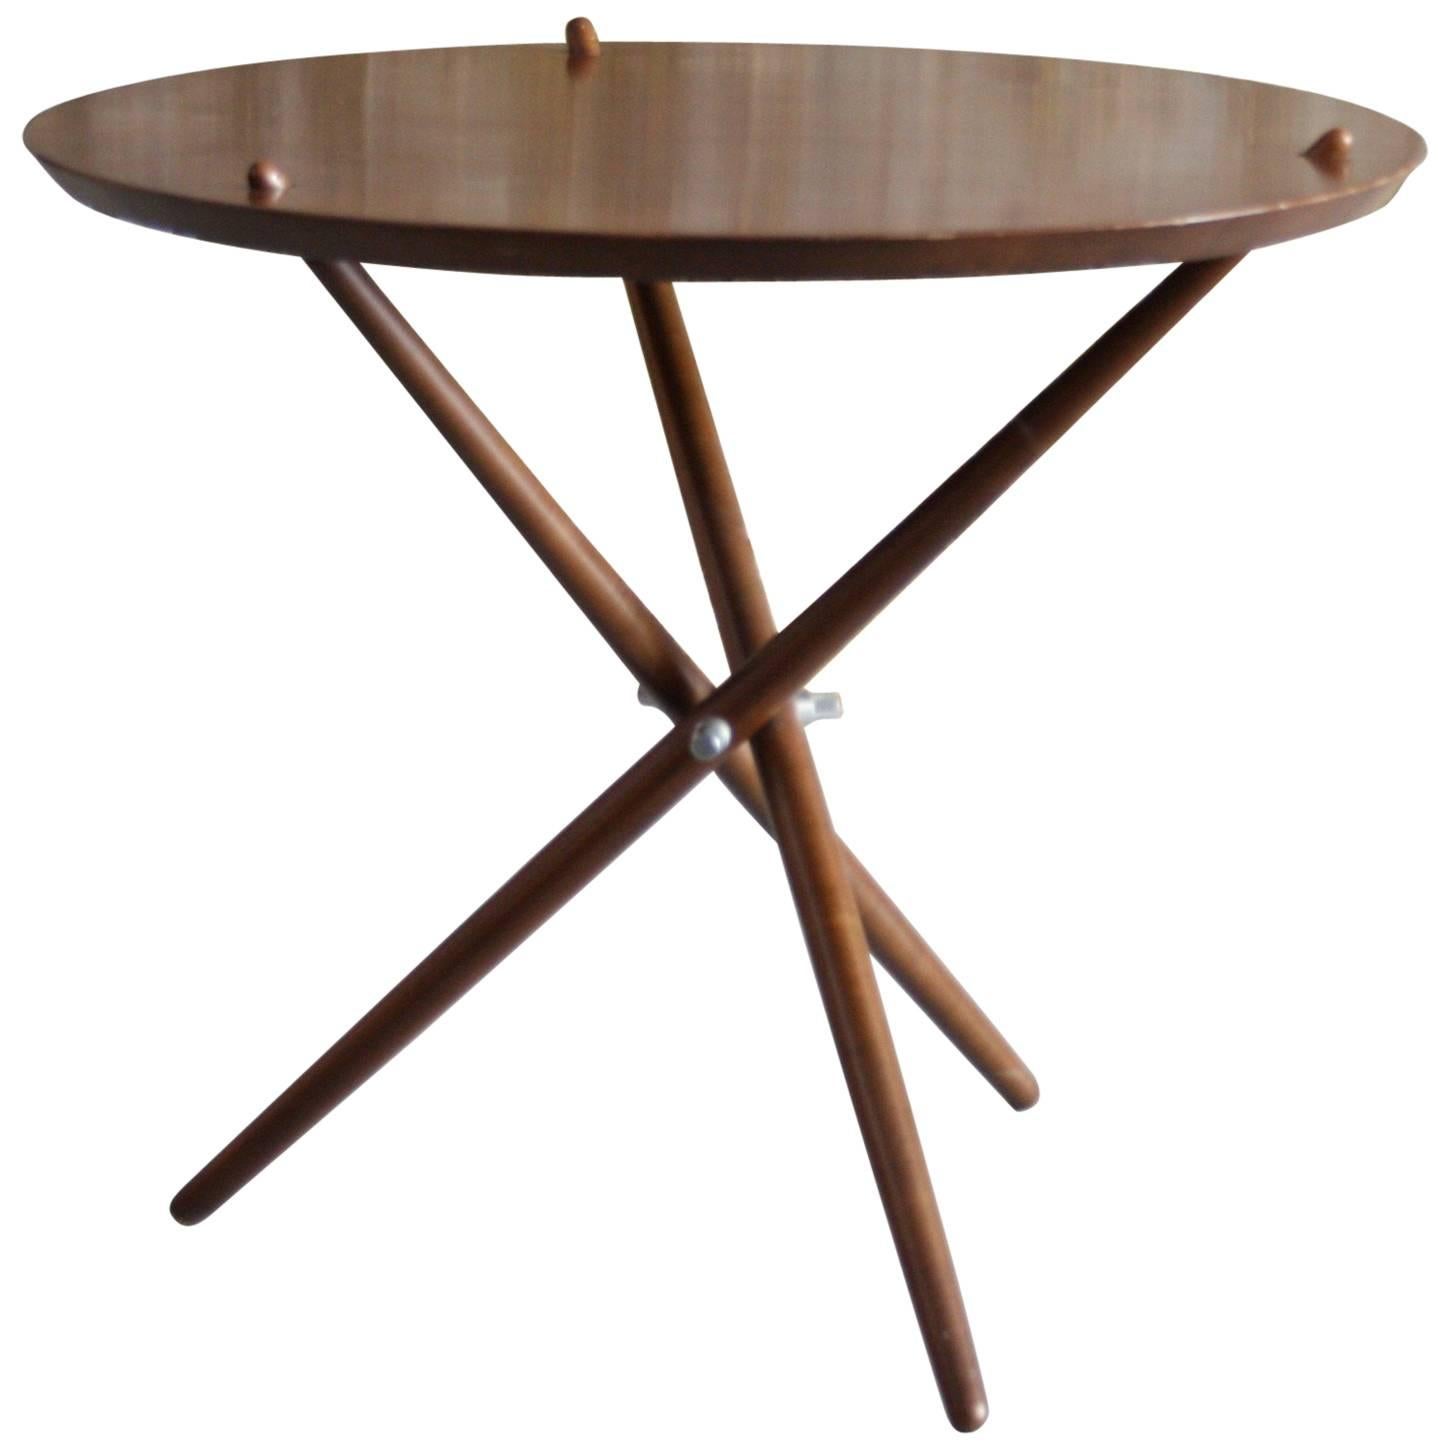 1948 Hans Bellman Swiss Modernist Tripod Table for Wohnbedarf Imported by Knoll